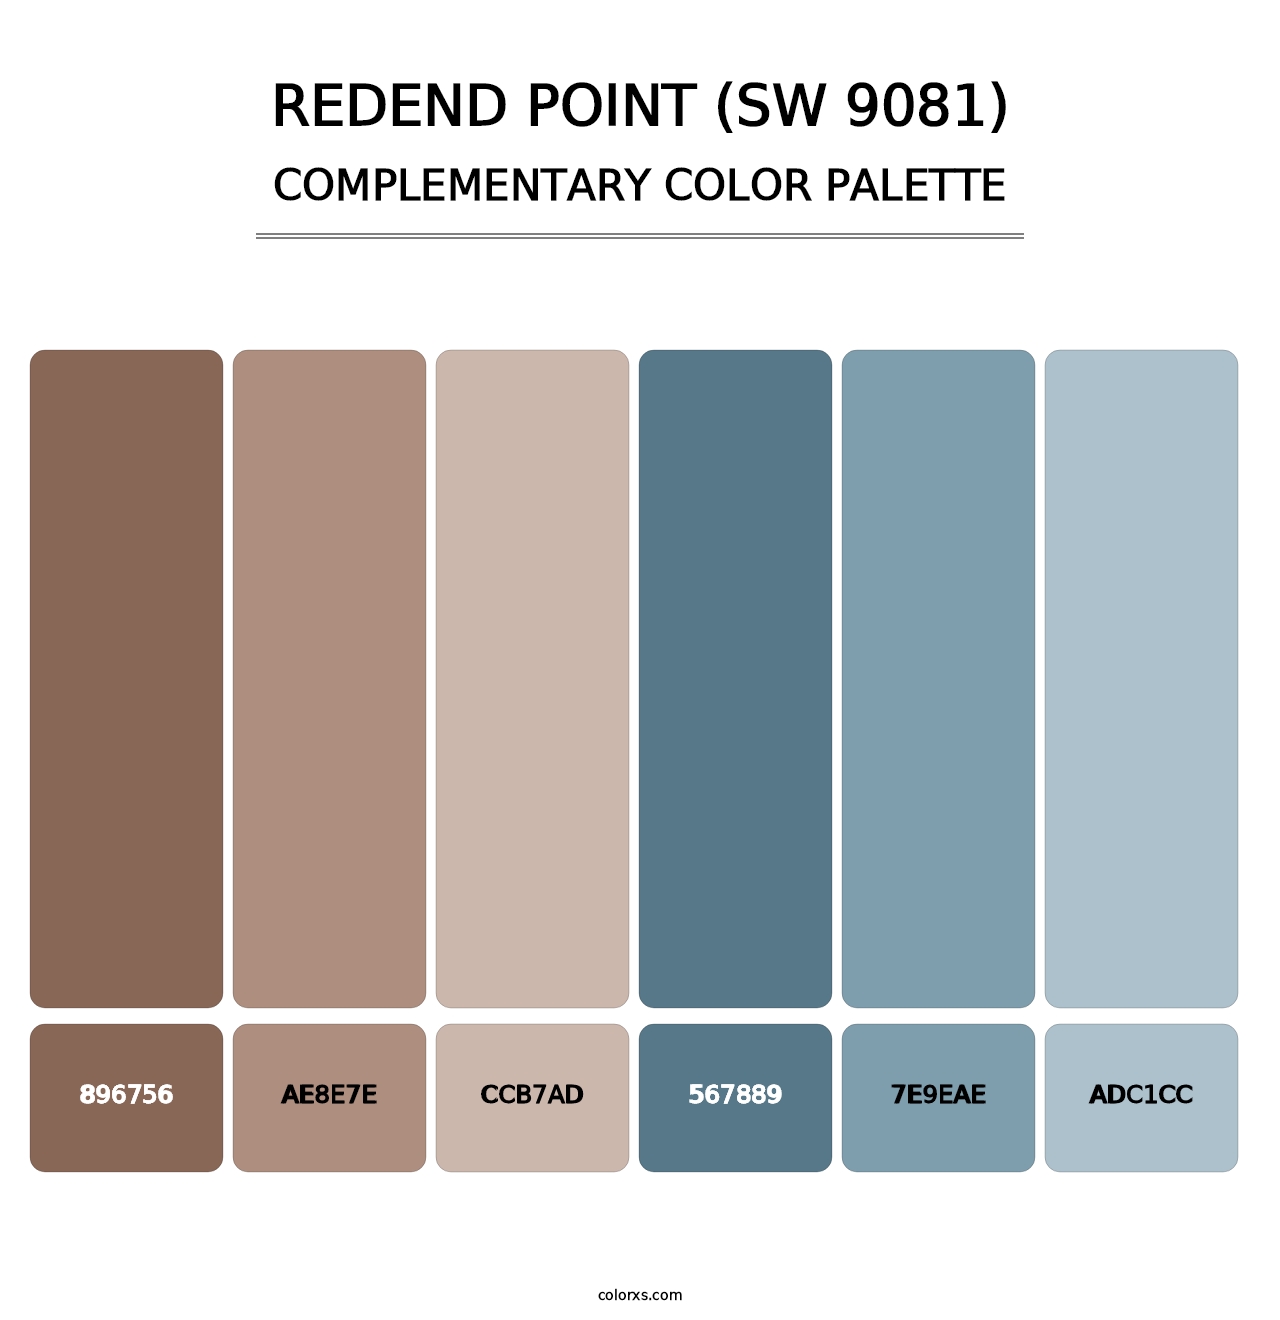 Redend Point (SW 9081) - Complementary Color Palette